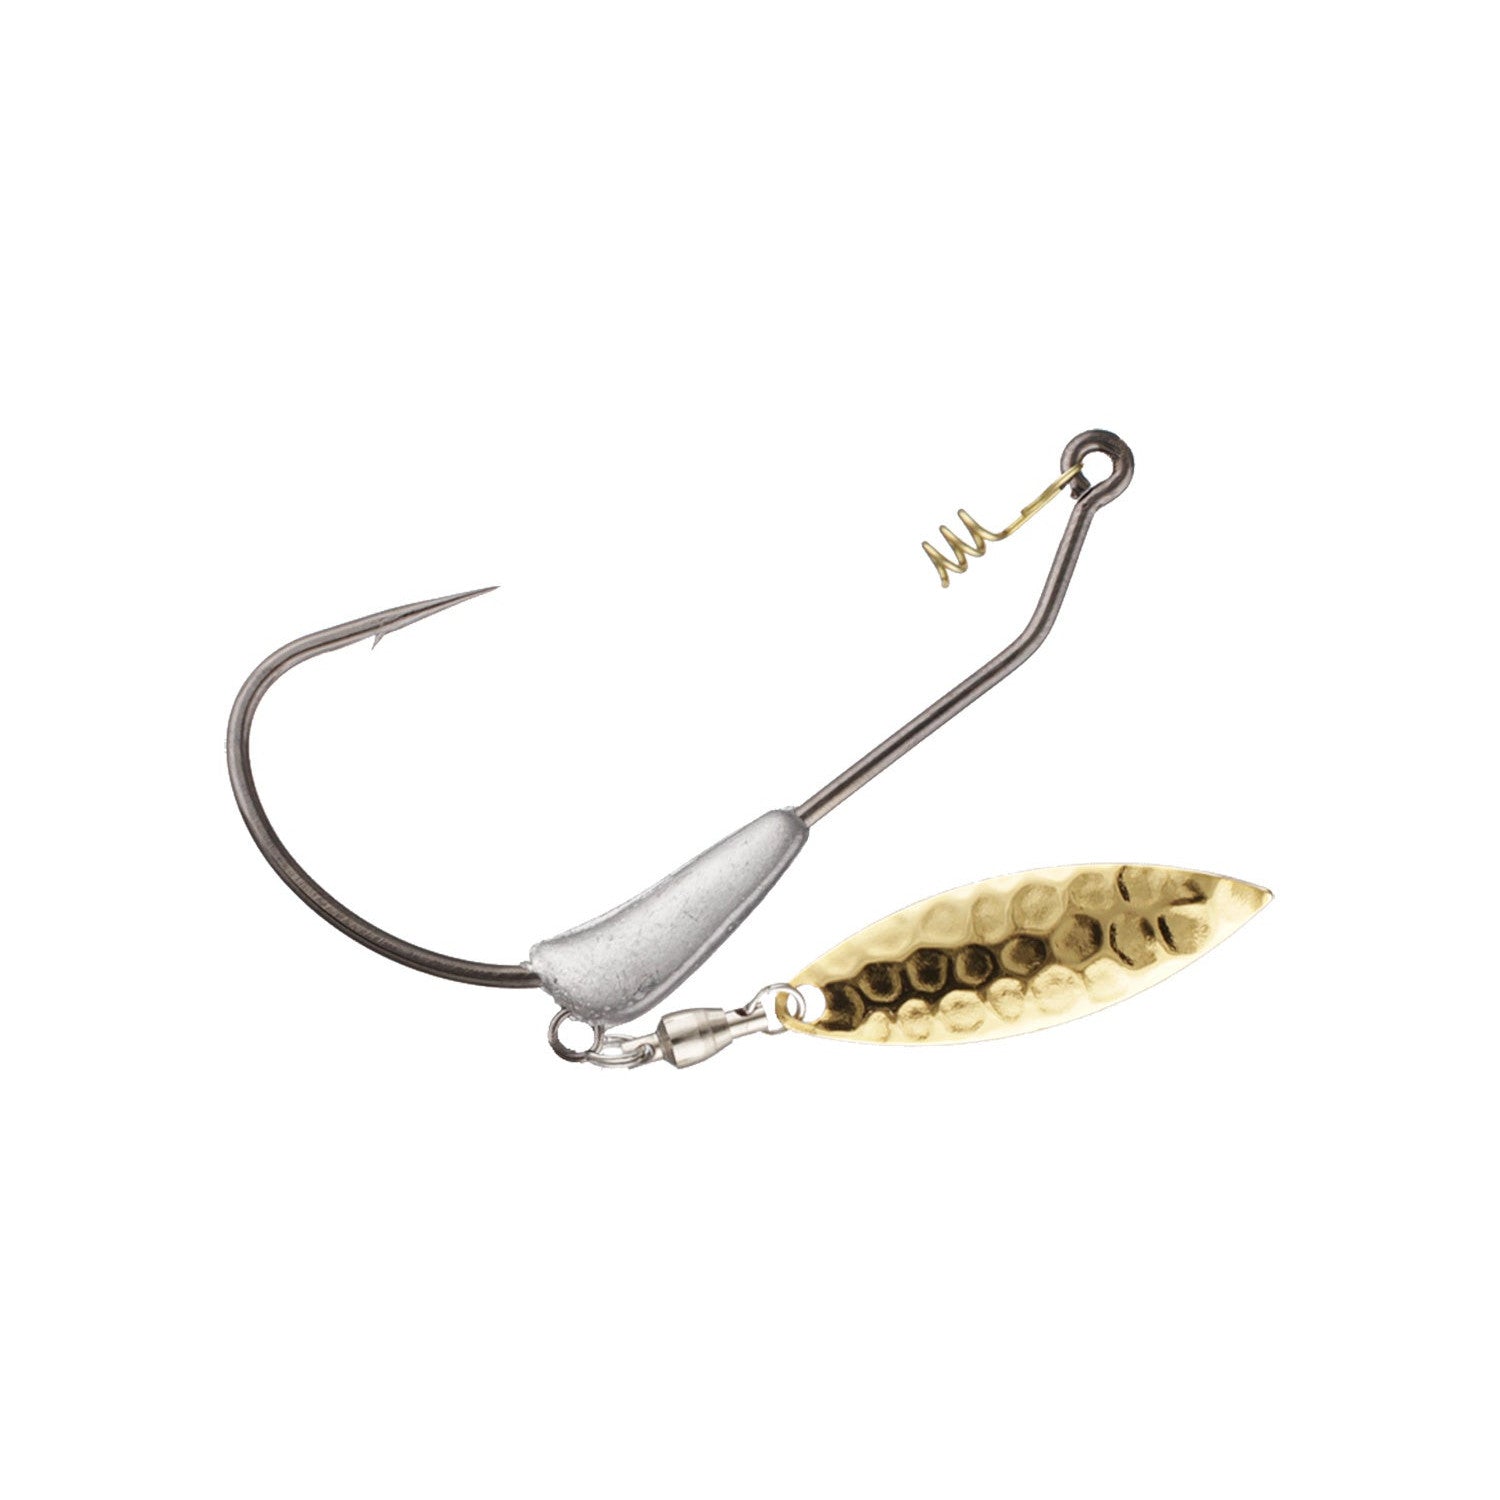 VMC Weighted Finess Swimbait - 7315SL - Last Cast Tackle